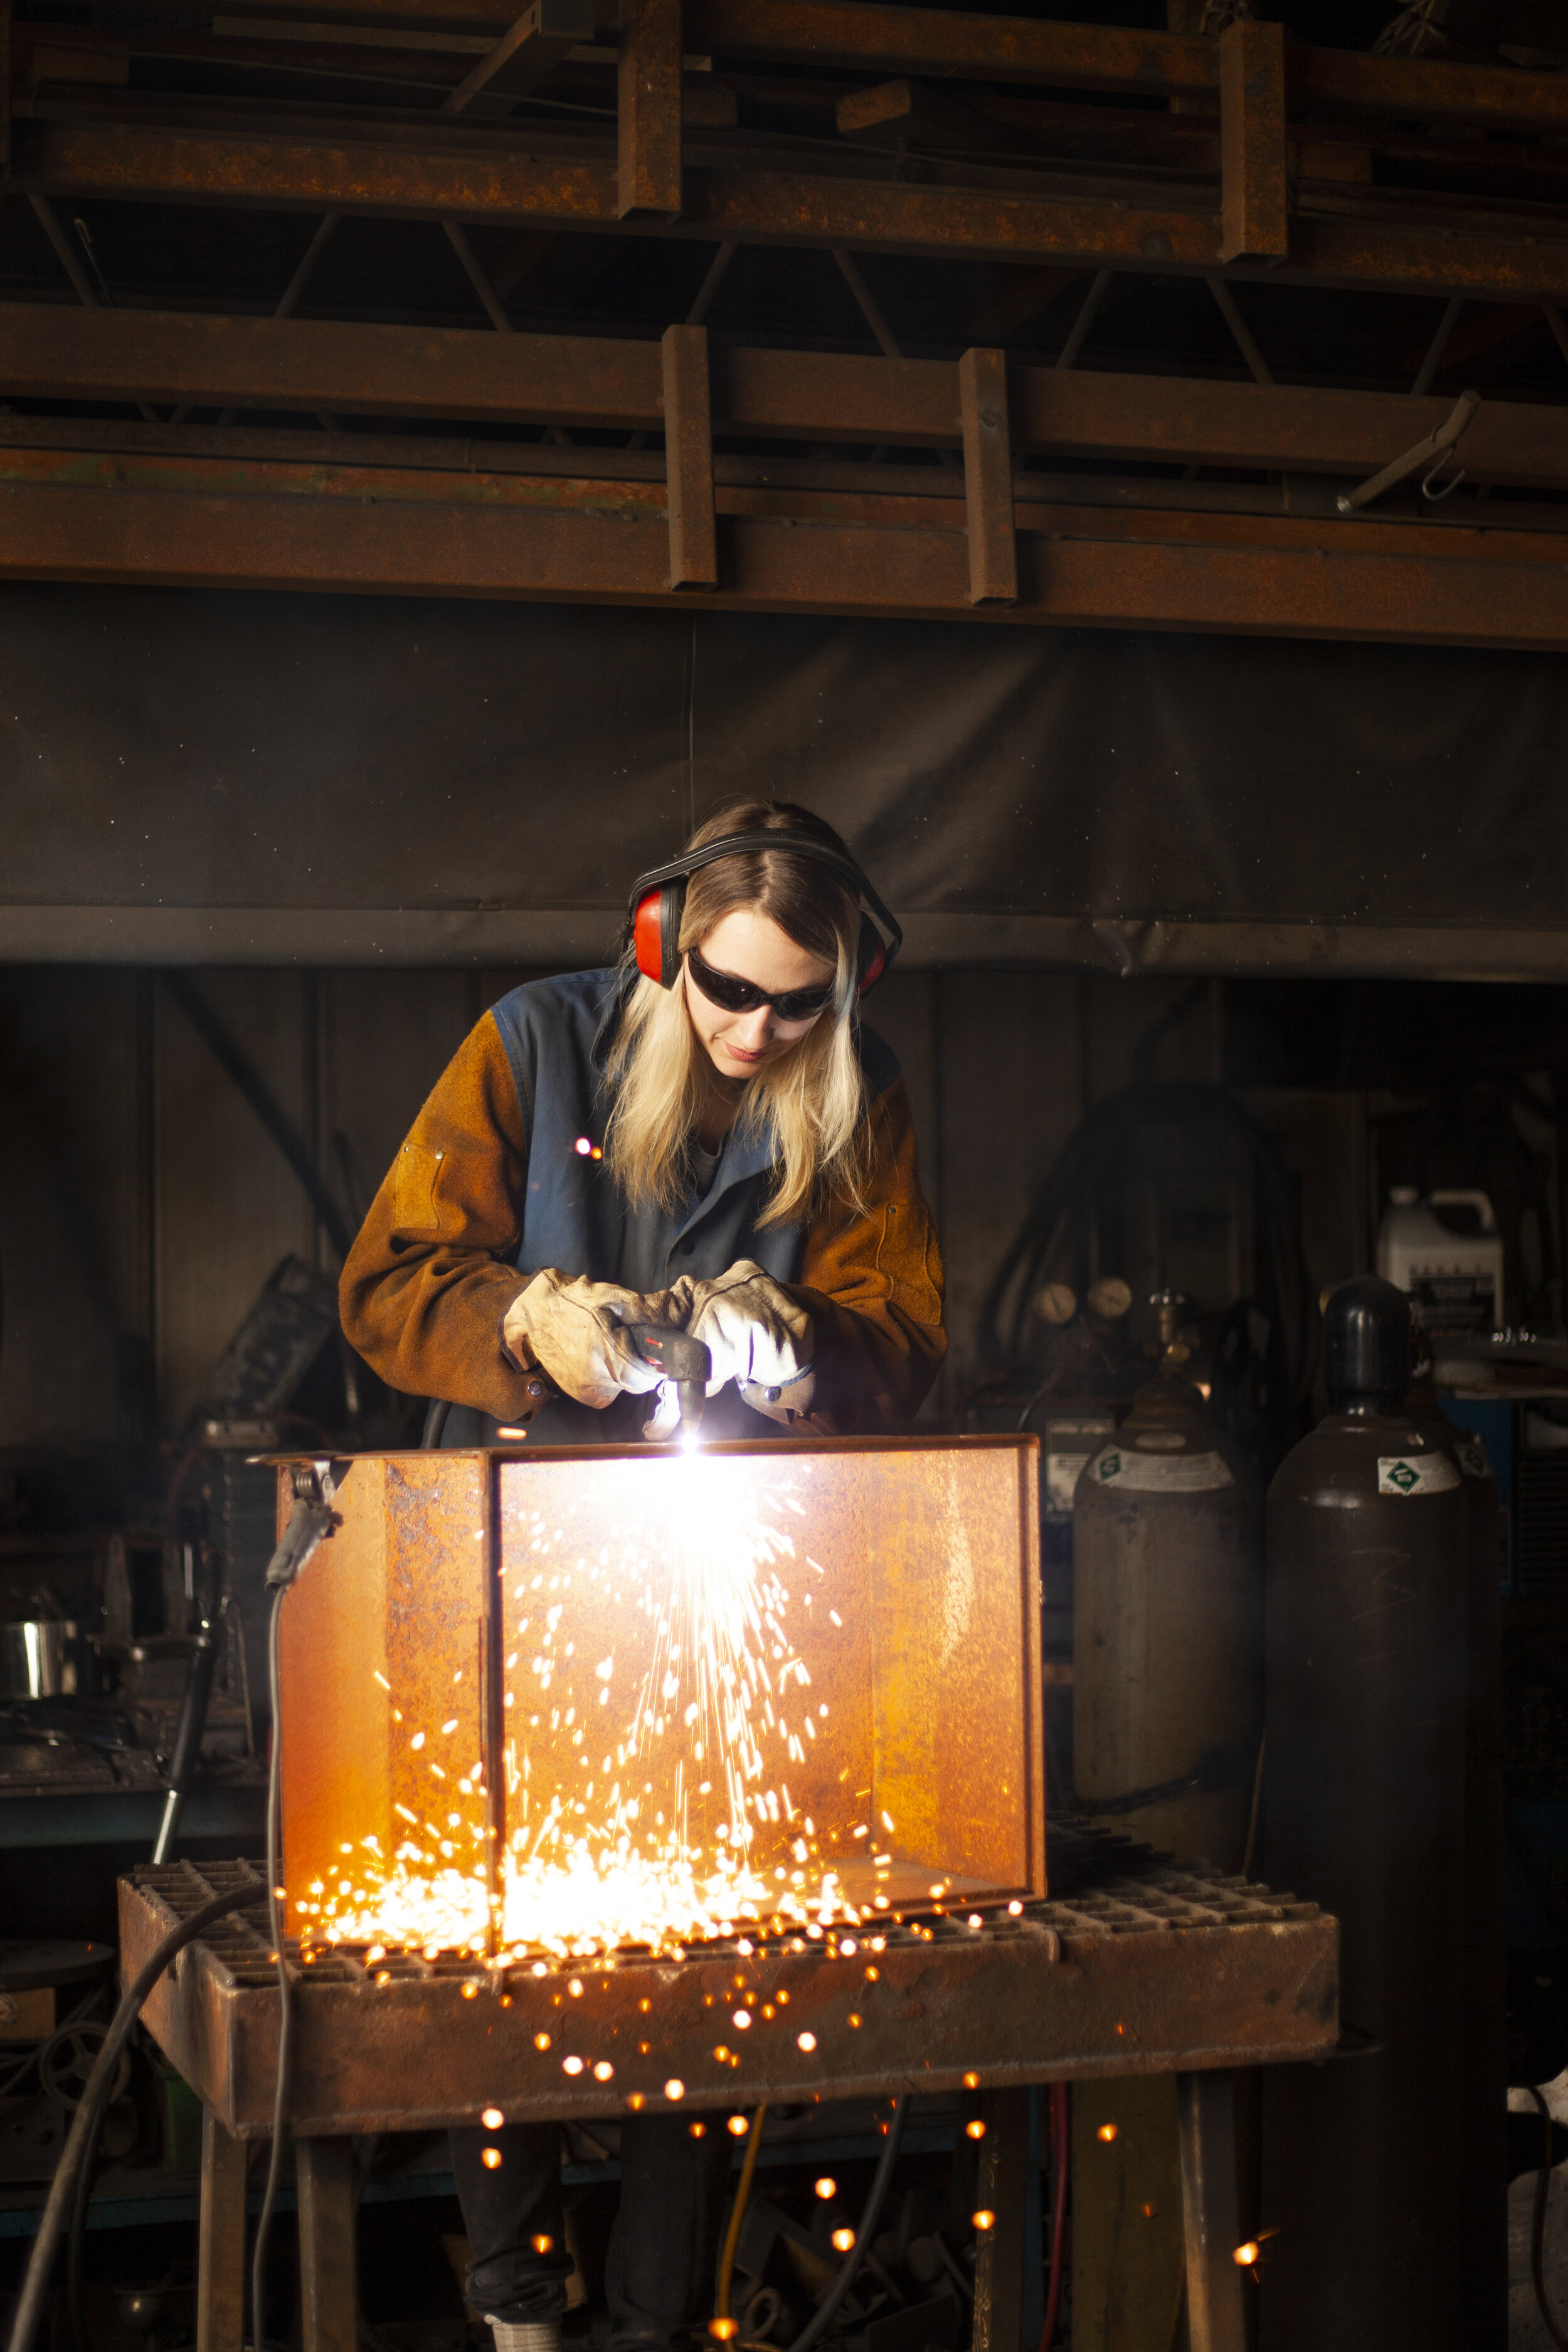  Shot while on assignment for Metroland Media: Port Perry Star. May 4 2019.   Metal artist Jasmine Rutschman performing a demonstration with her main tool, a plasma cutter, as part of the Lake Scugog Studio Tours.  